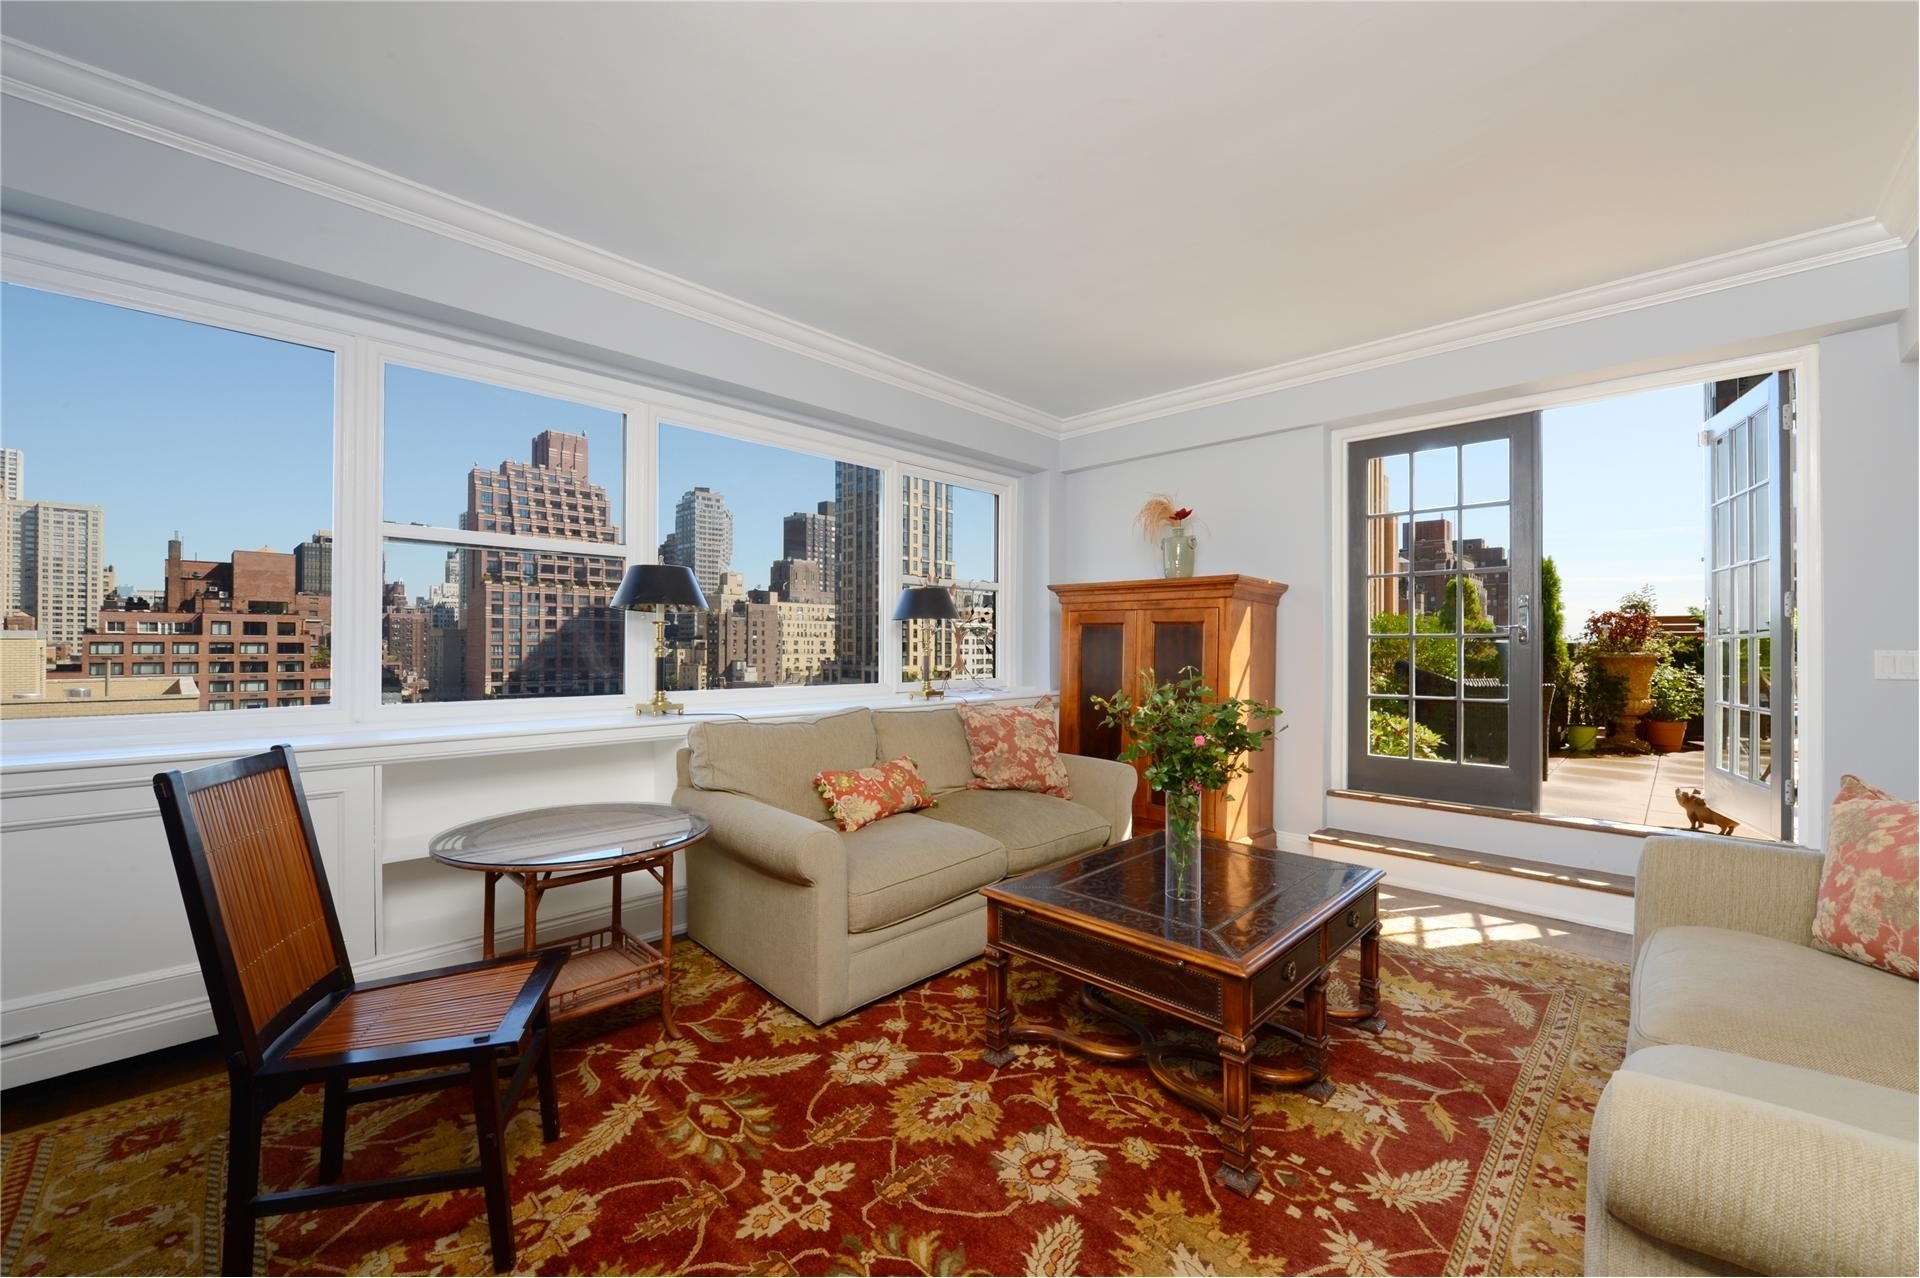 Property at 330 East 49th St, PHE New York